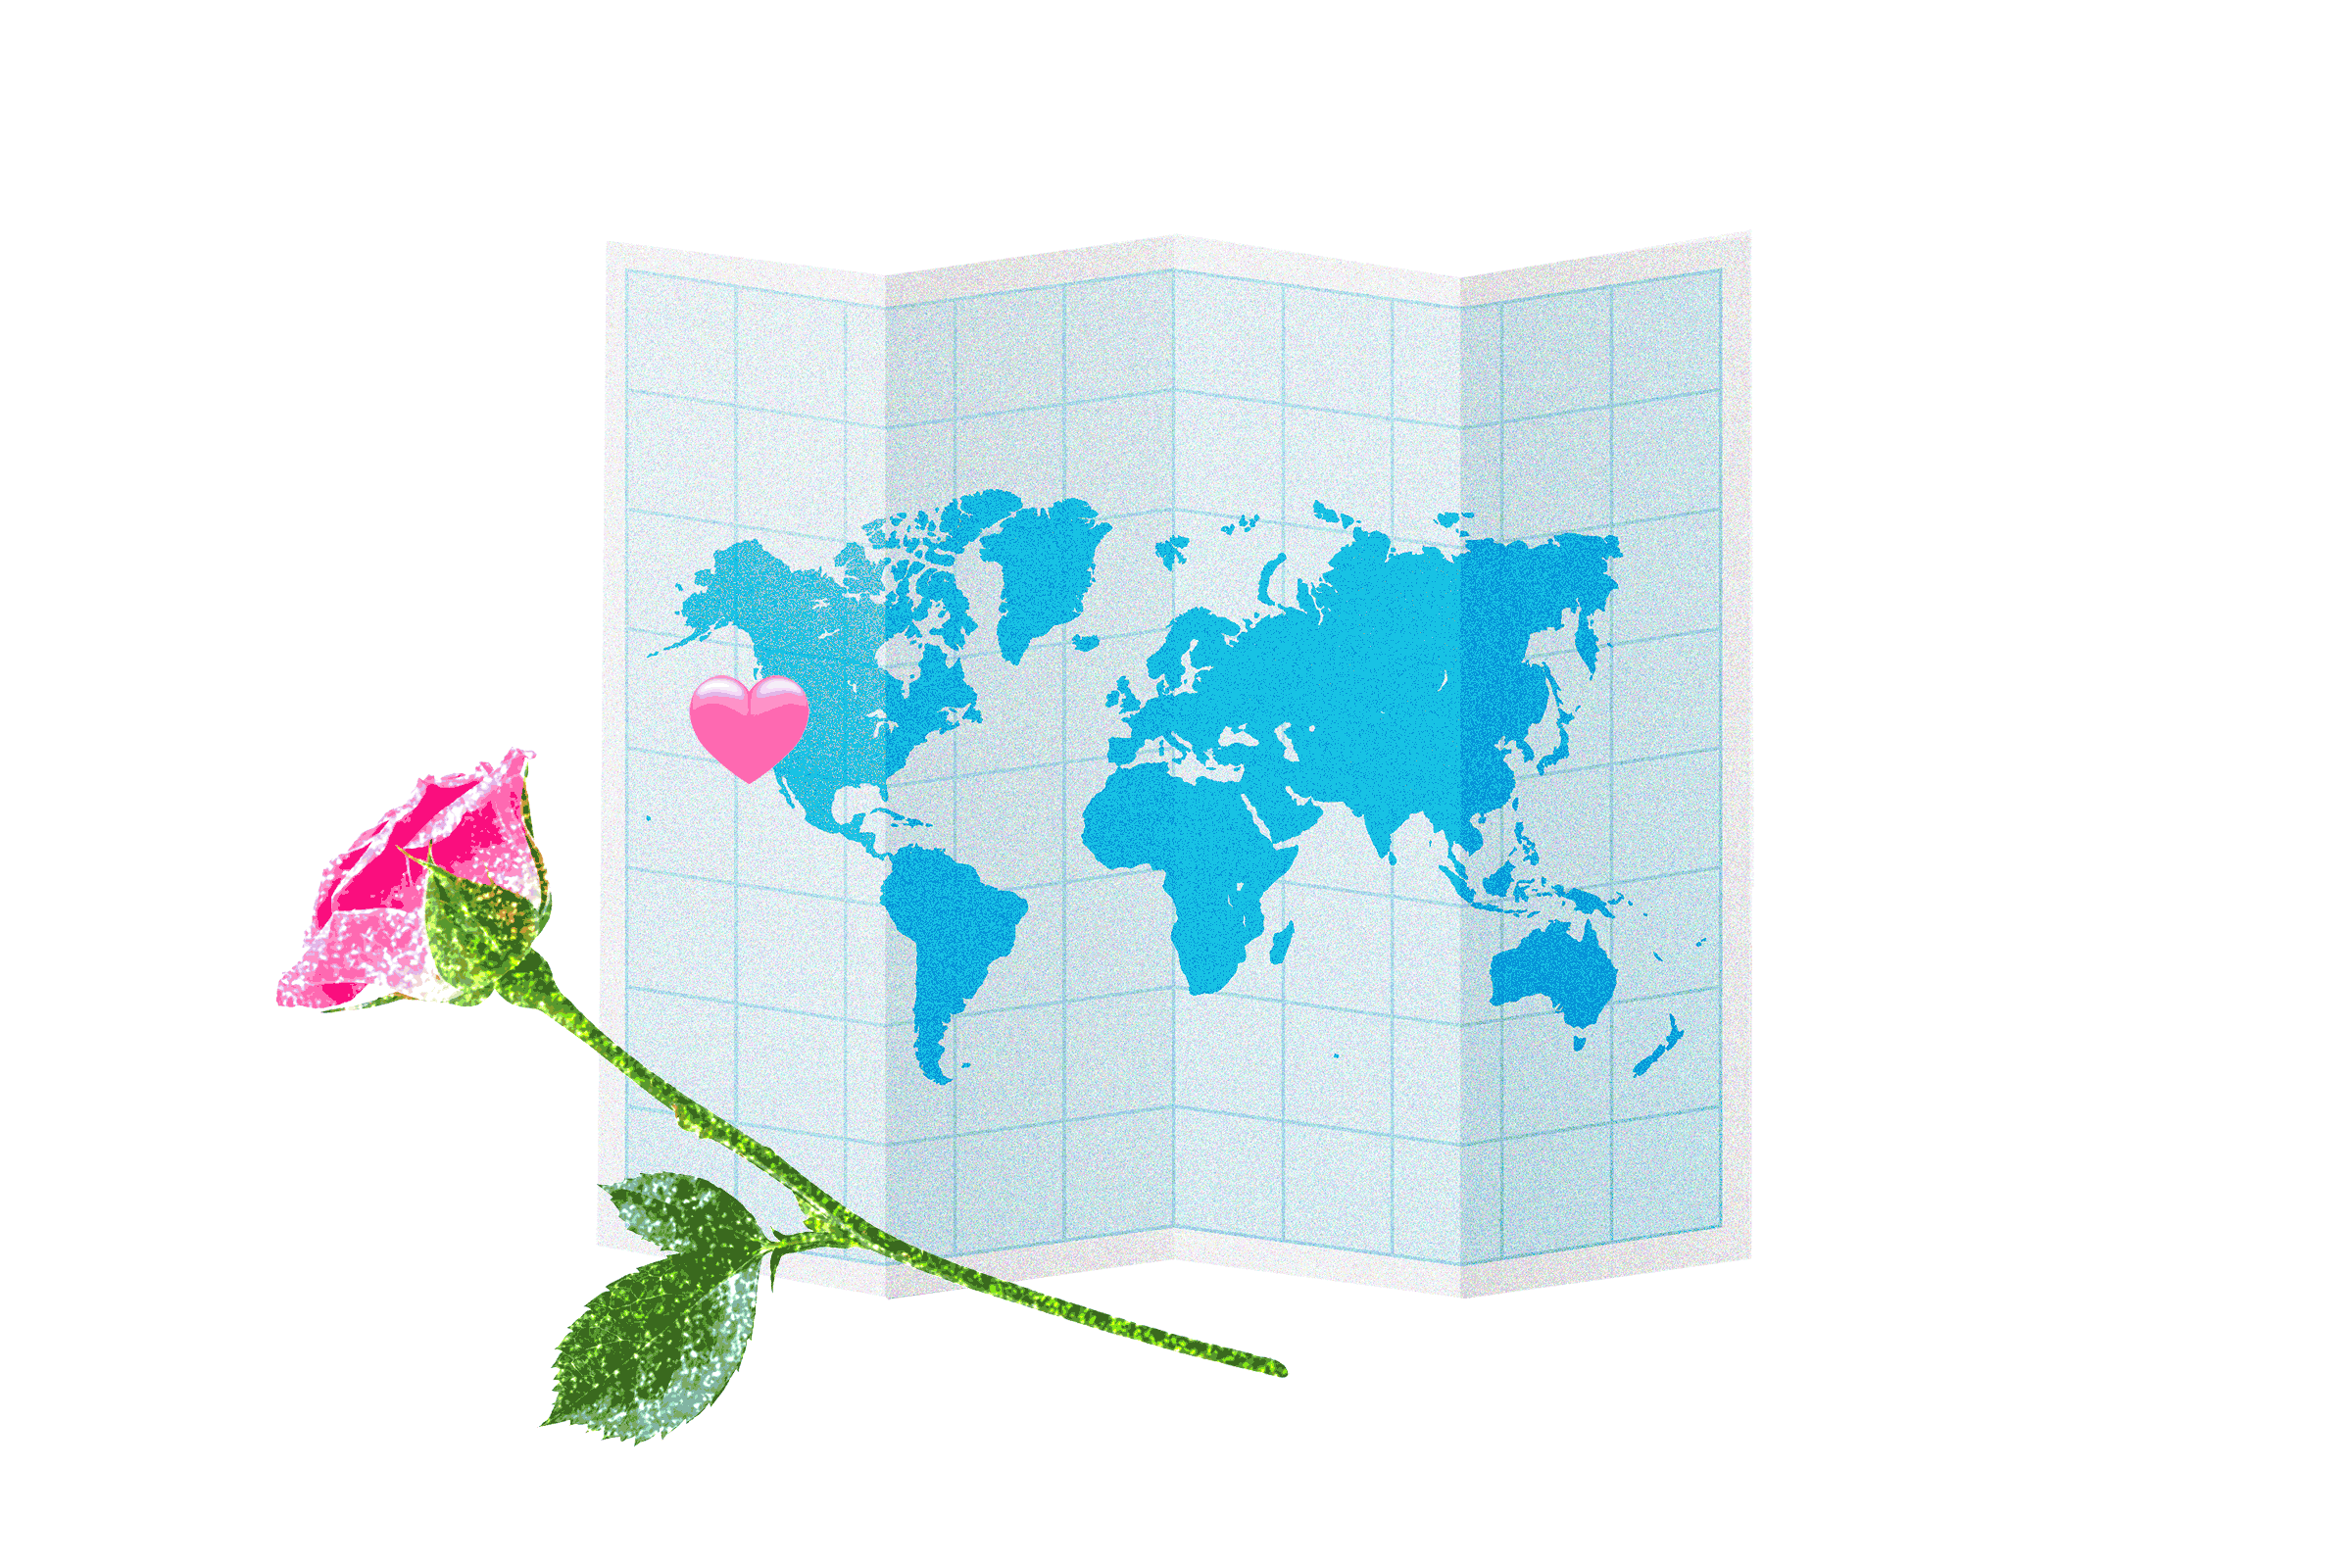 Heart moving around a map of the world, sparkly rose 